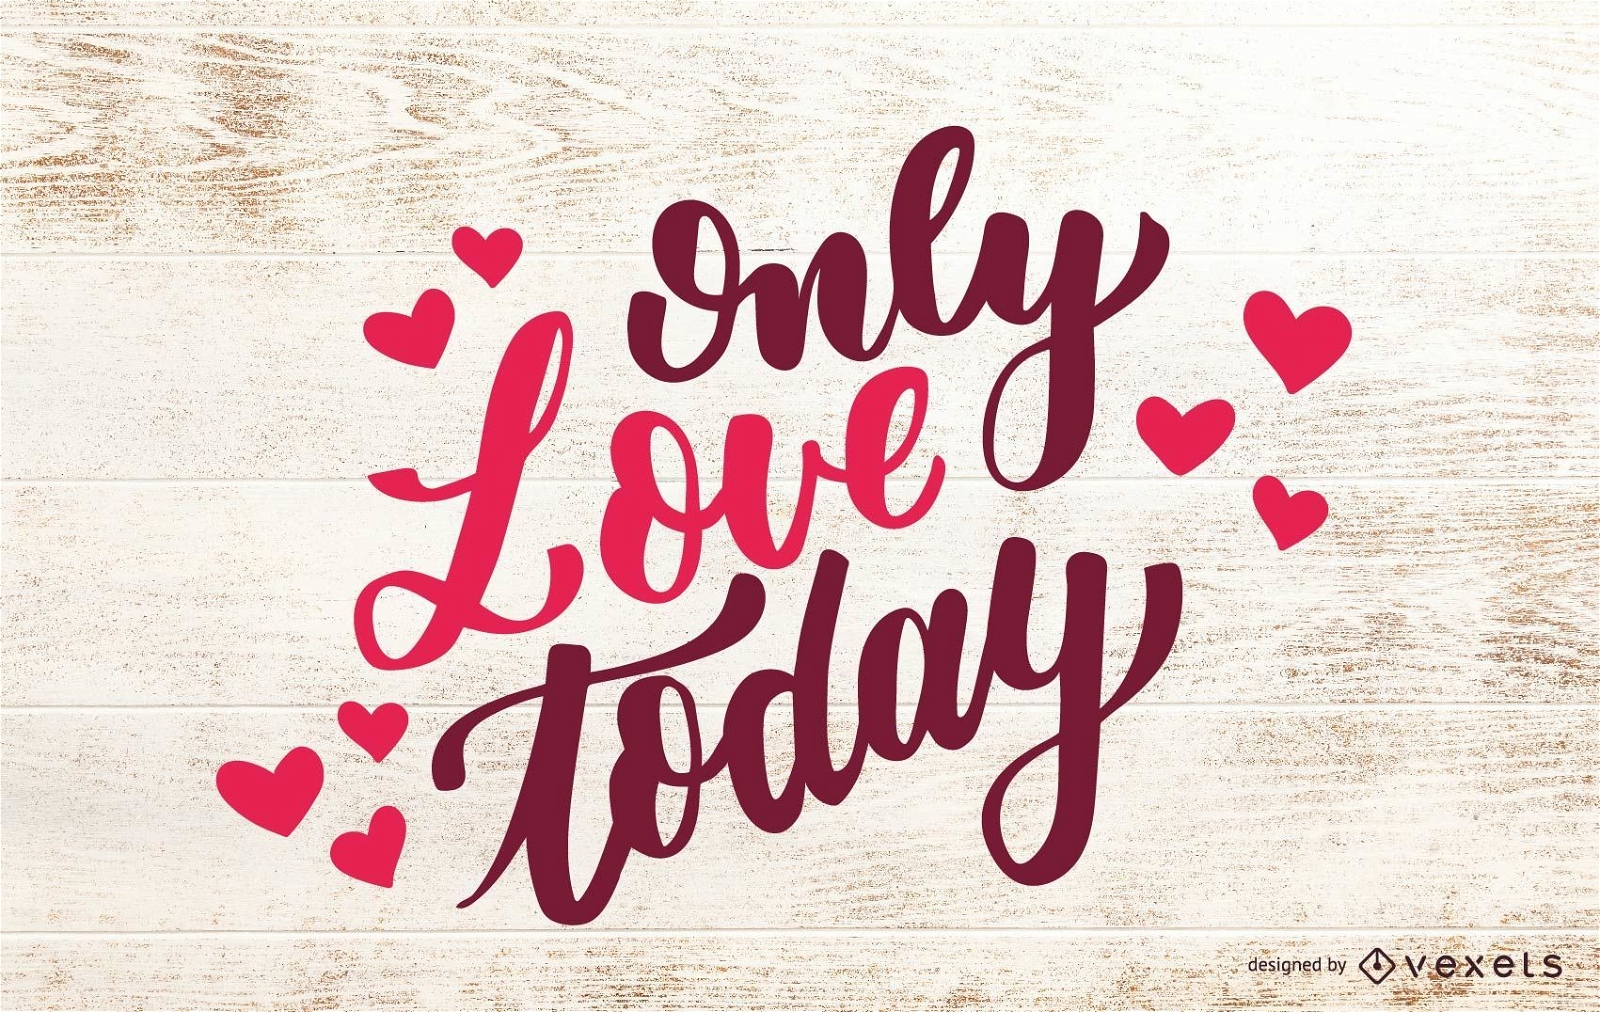 Only Love Today Lettering Design 